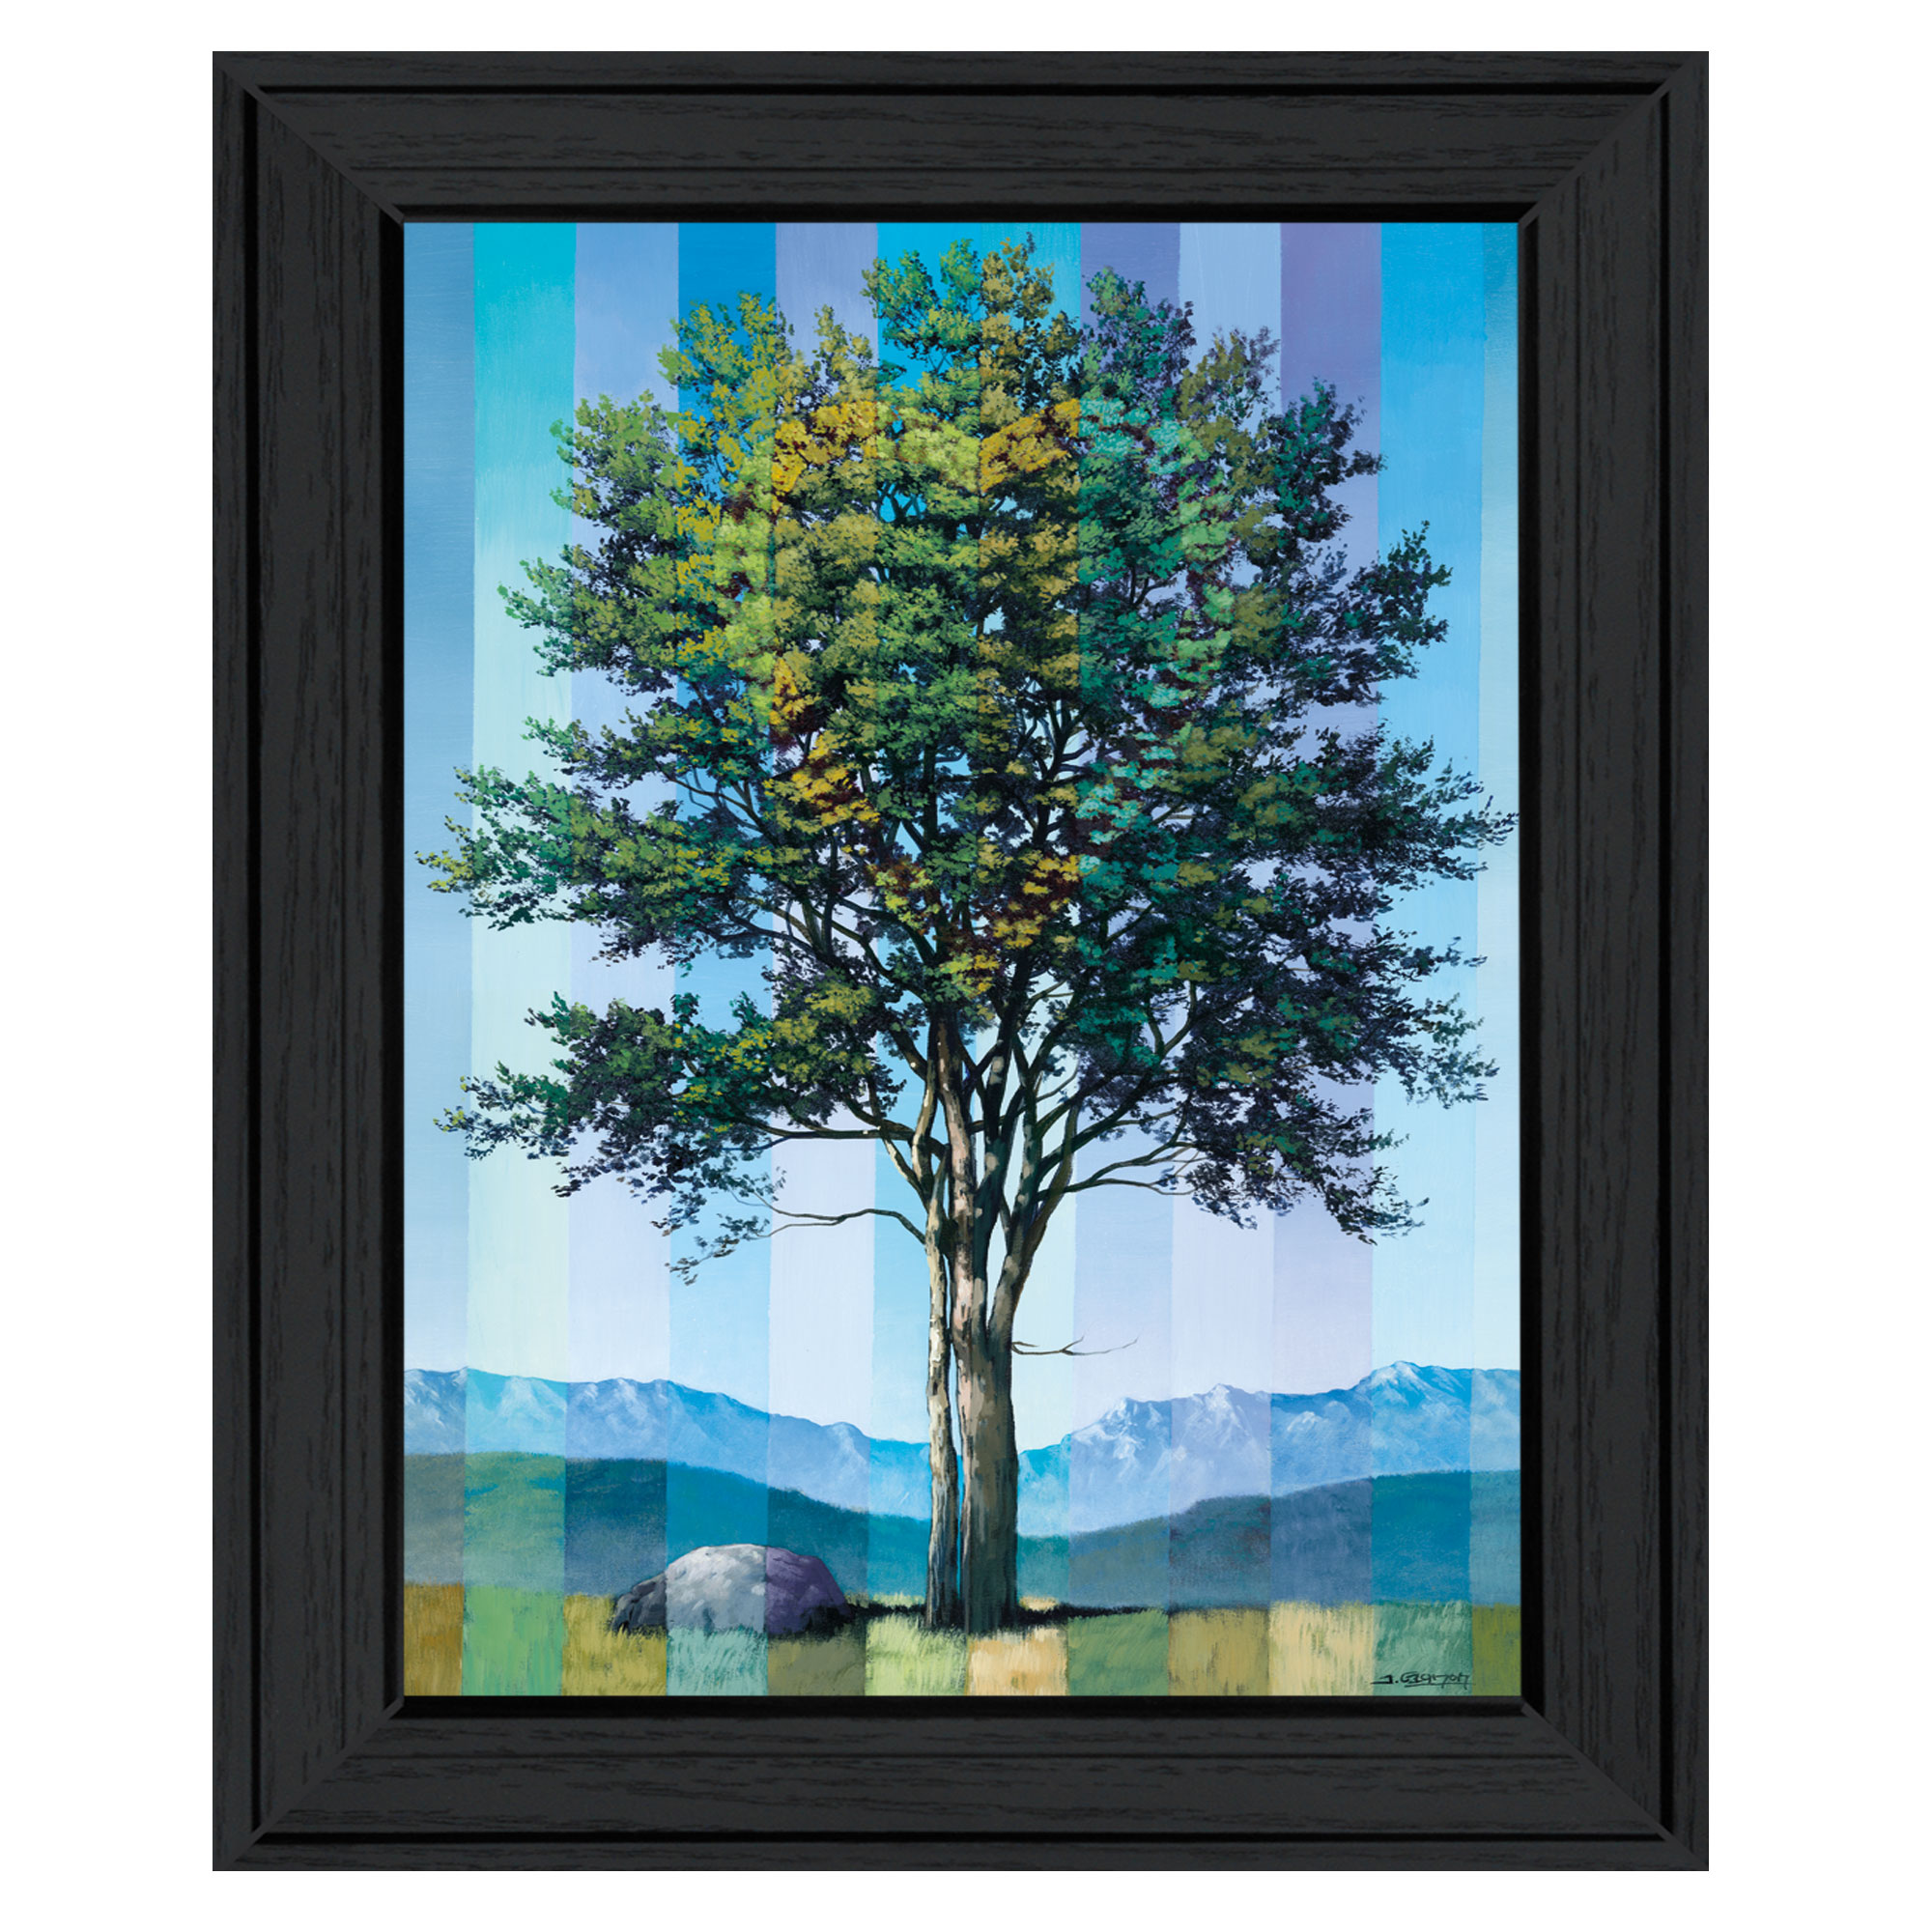 "When Love Grows" by Tim Gagnon, Ready to Hang Framed Print, Black Frame